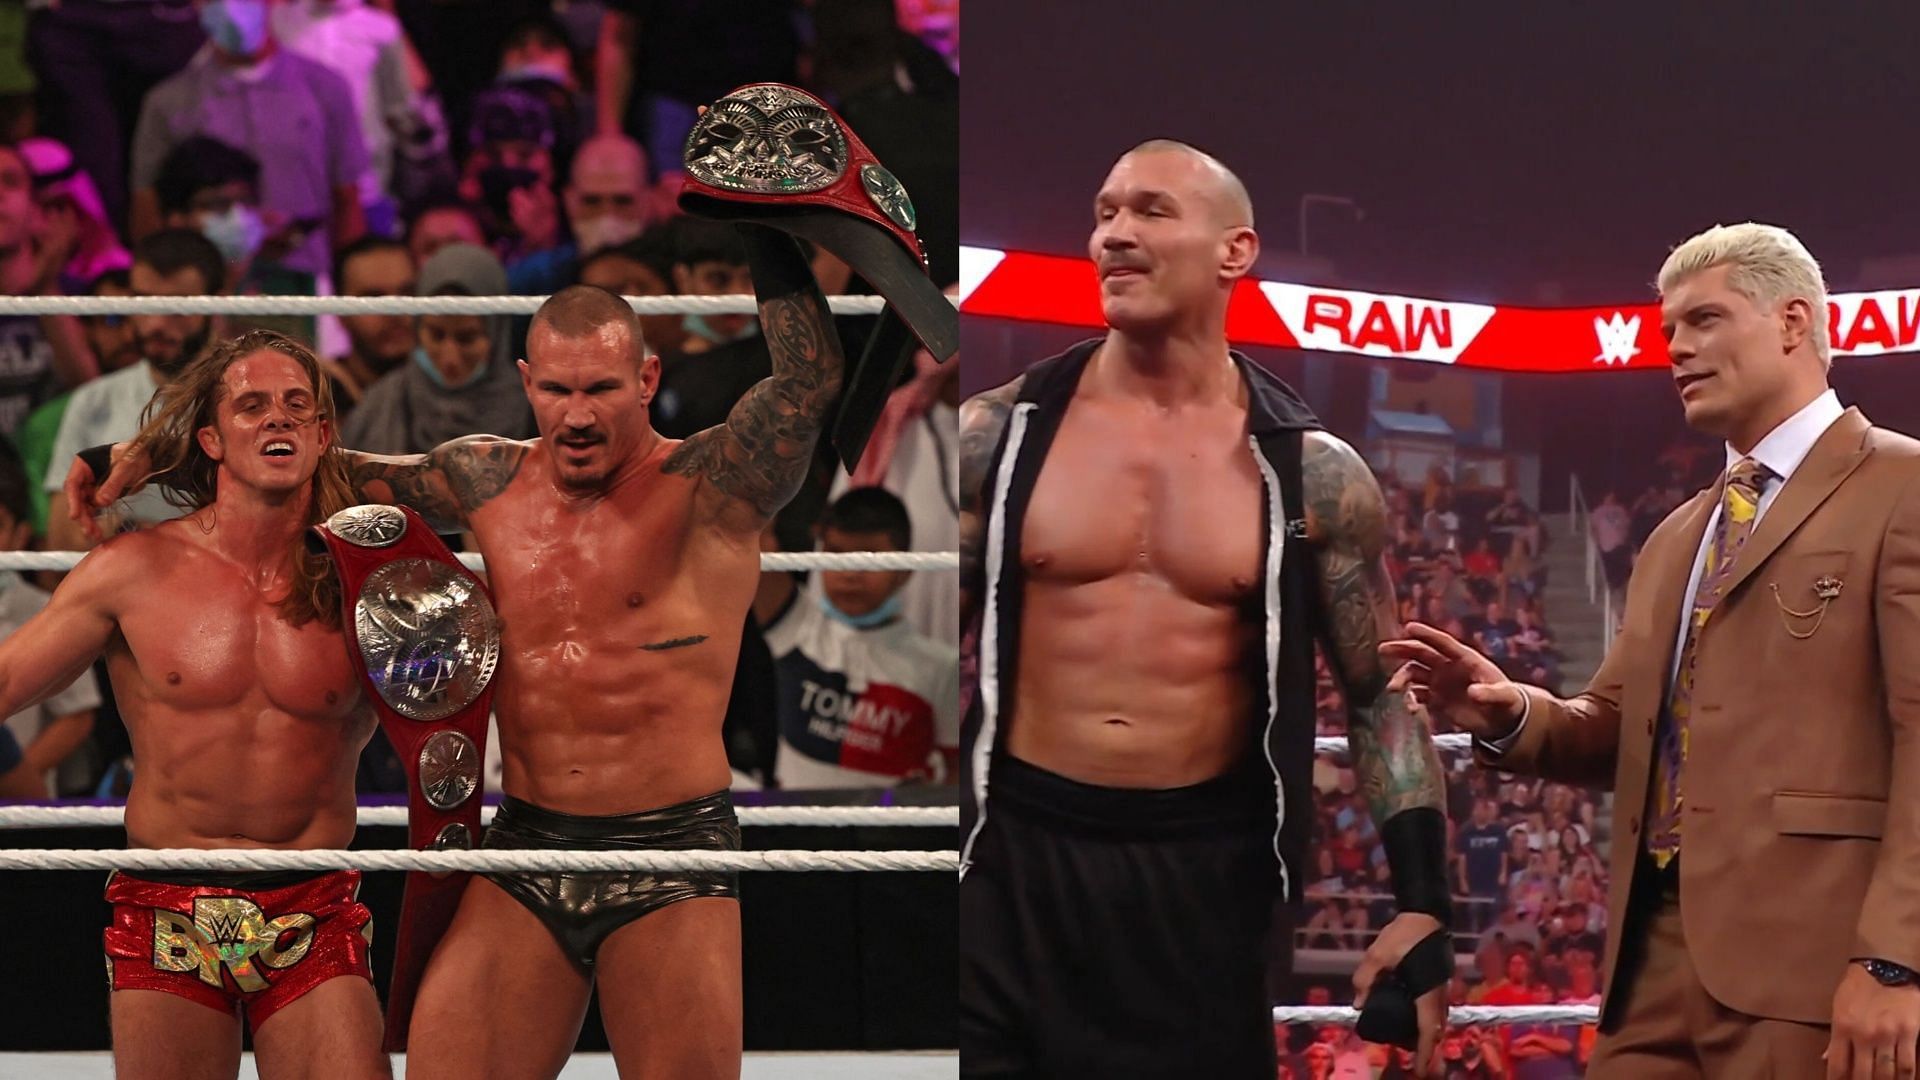 5 potential replacements for Randy Orton in WWE